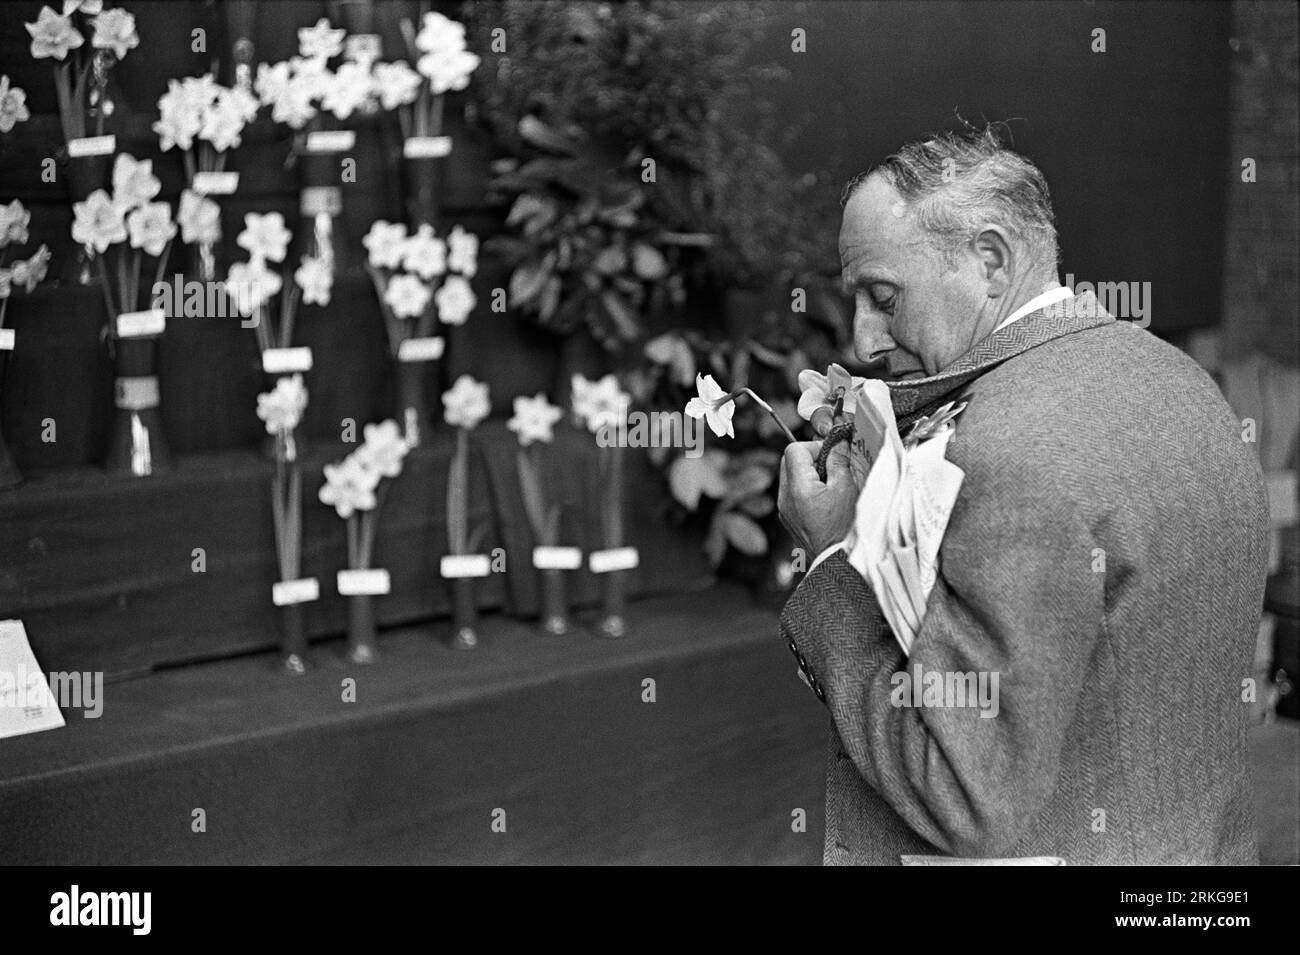 Flower Show 1960s UK. The Royal Horticultural Society flower show, a member of the public makes himself a buttonhole with some competition Narcissi. Westminster, London, England circa May 1968. HOMER SYKES Stock Photo